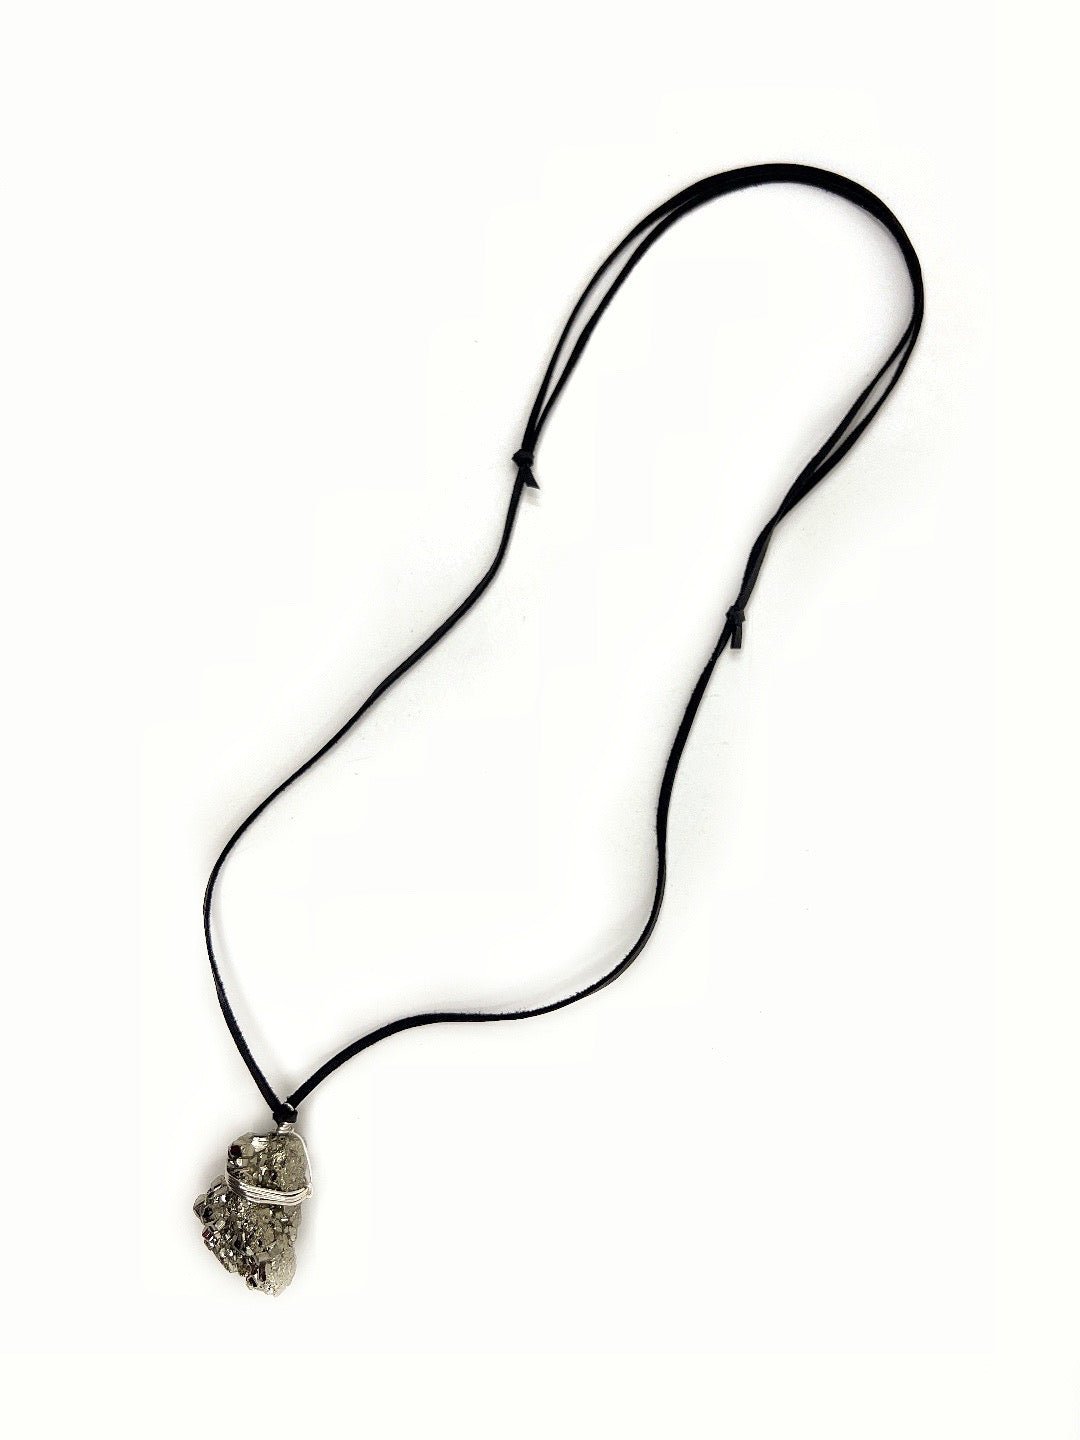 Pyrite Mens Necklace - Ariana Ost